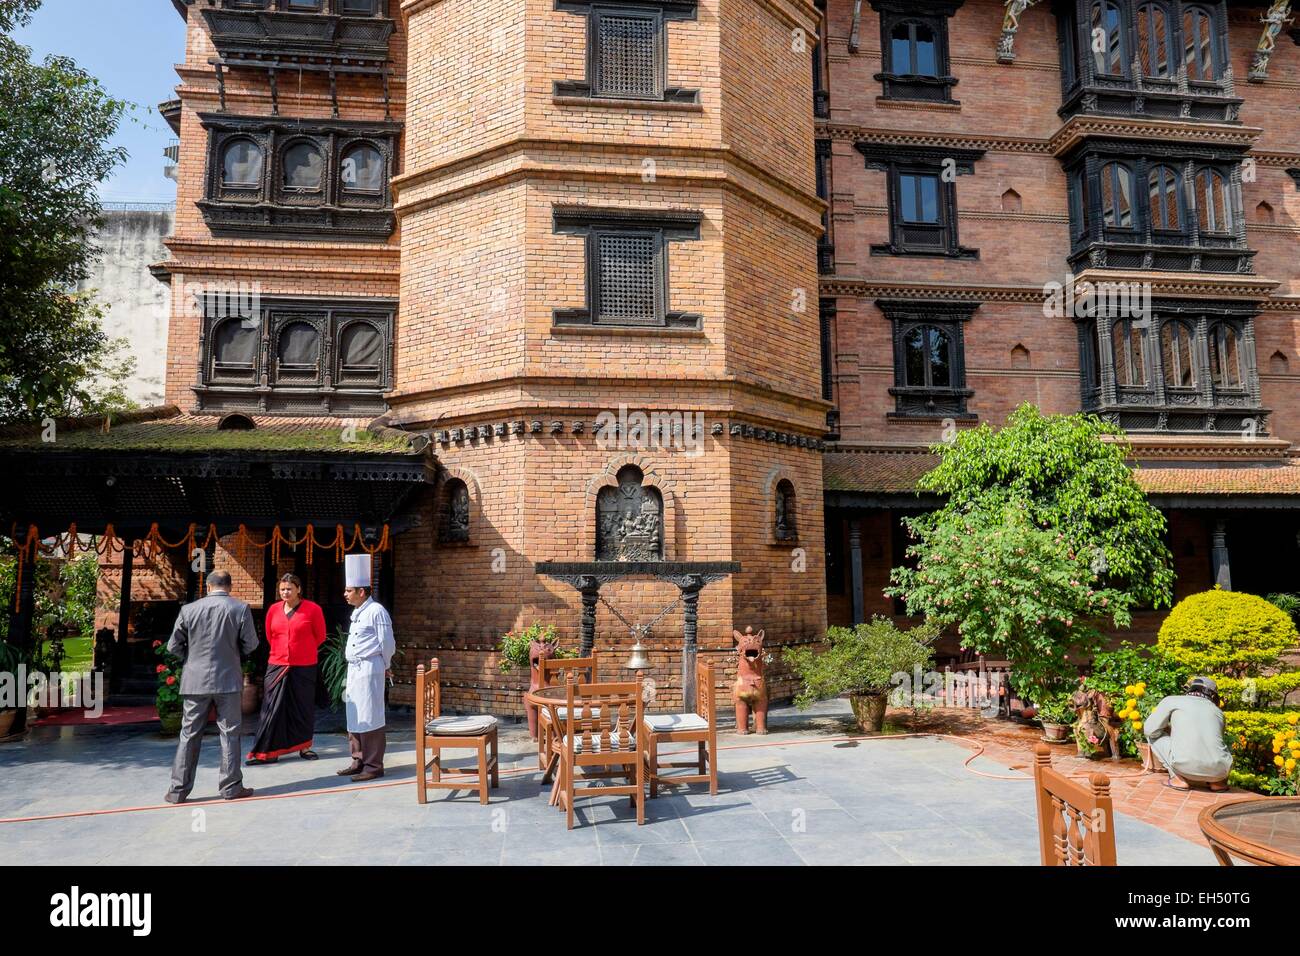 Nepal, Kathmandu valley, listed as World Heritage by UNESCO, Bagmati zone, Kathmandu, Kantipur Temple House boutique hotel with a traditional Newar architecture Stock Photo